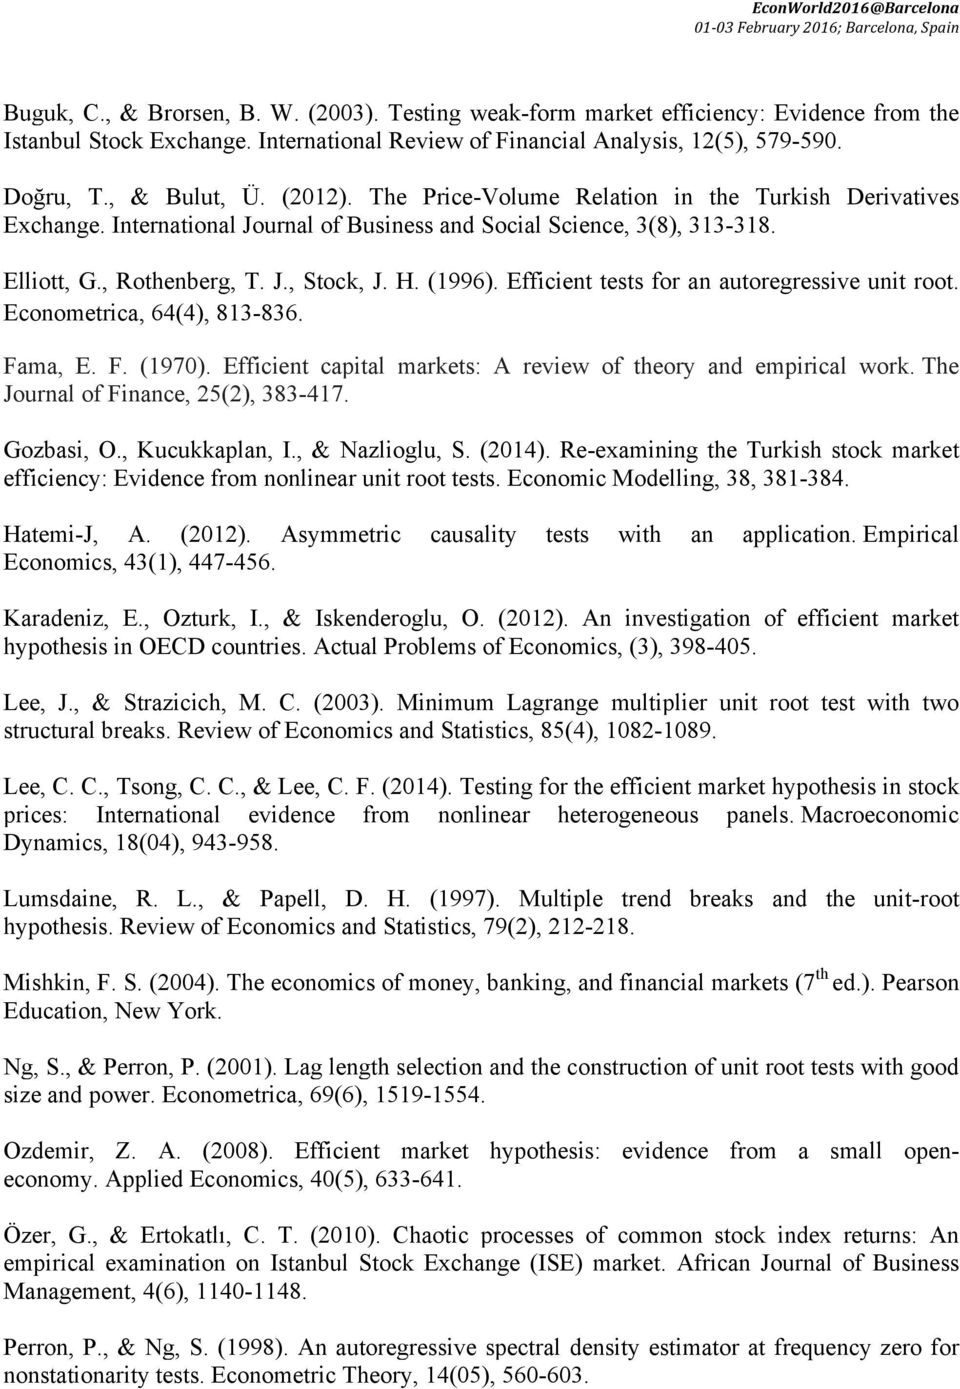 International Journal of Business and Social Science, 3(8), 313-318. Elliott, G., Rothenberg,. J., Stock, J. H. (1996). Efficient tests for an autoregressive unit root. Econometrica, 64(4), 813-836.